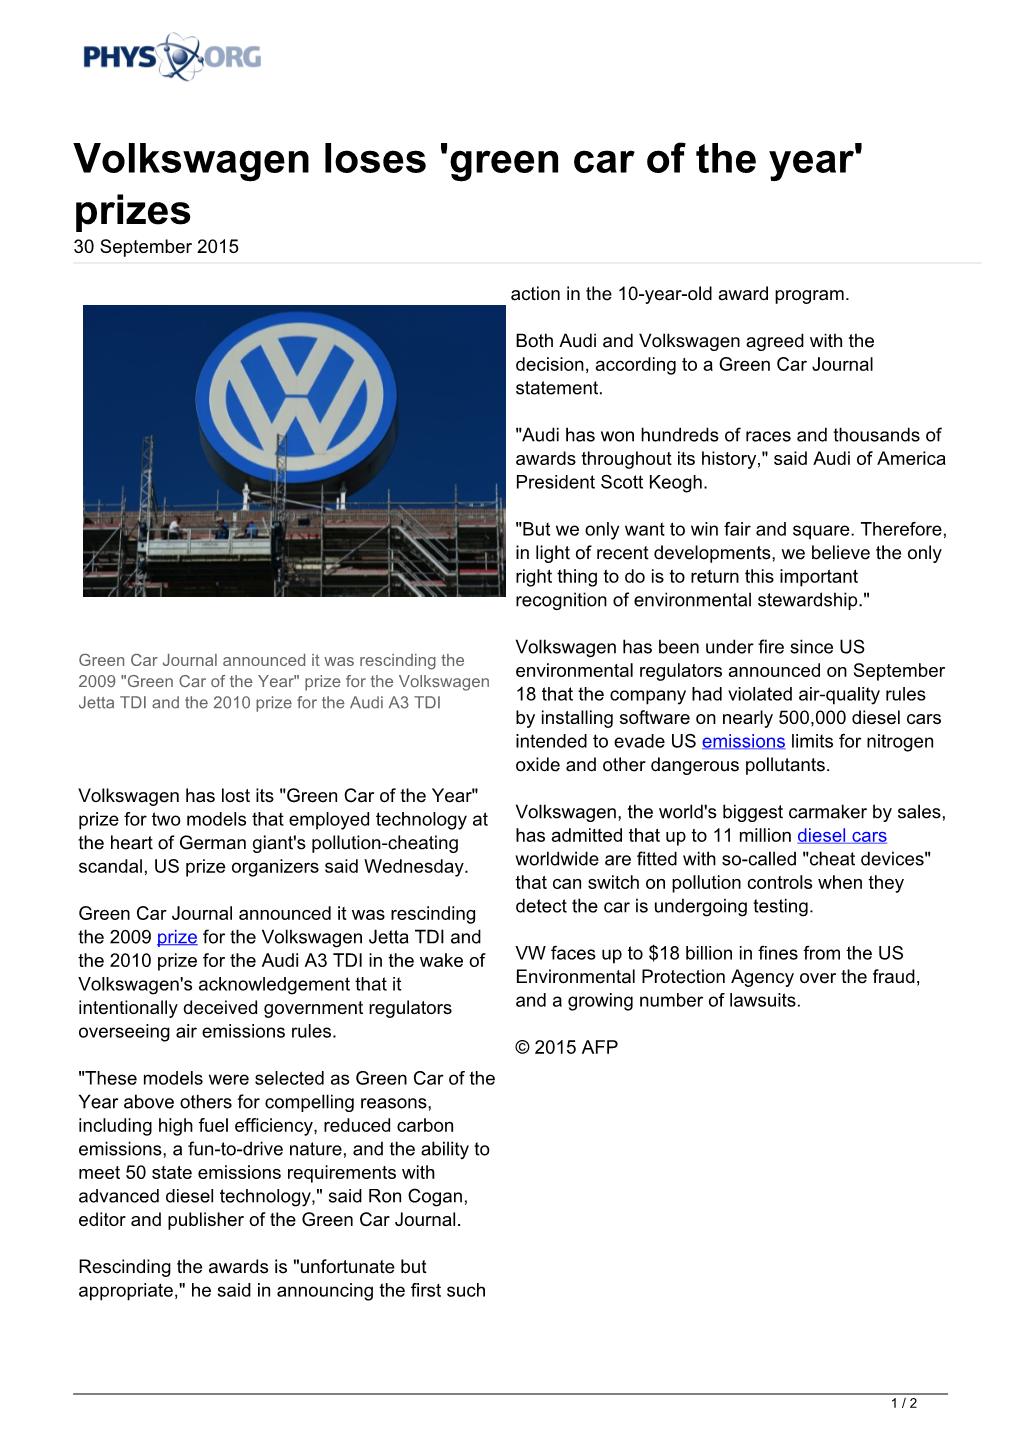 Volkswagen Loses 'Green Car of the Year' Prizes 30 September 2015